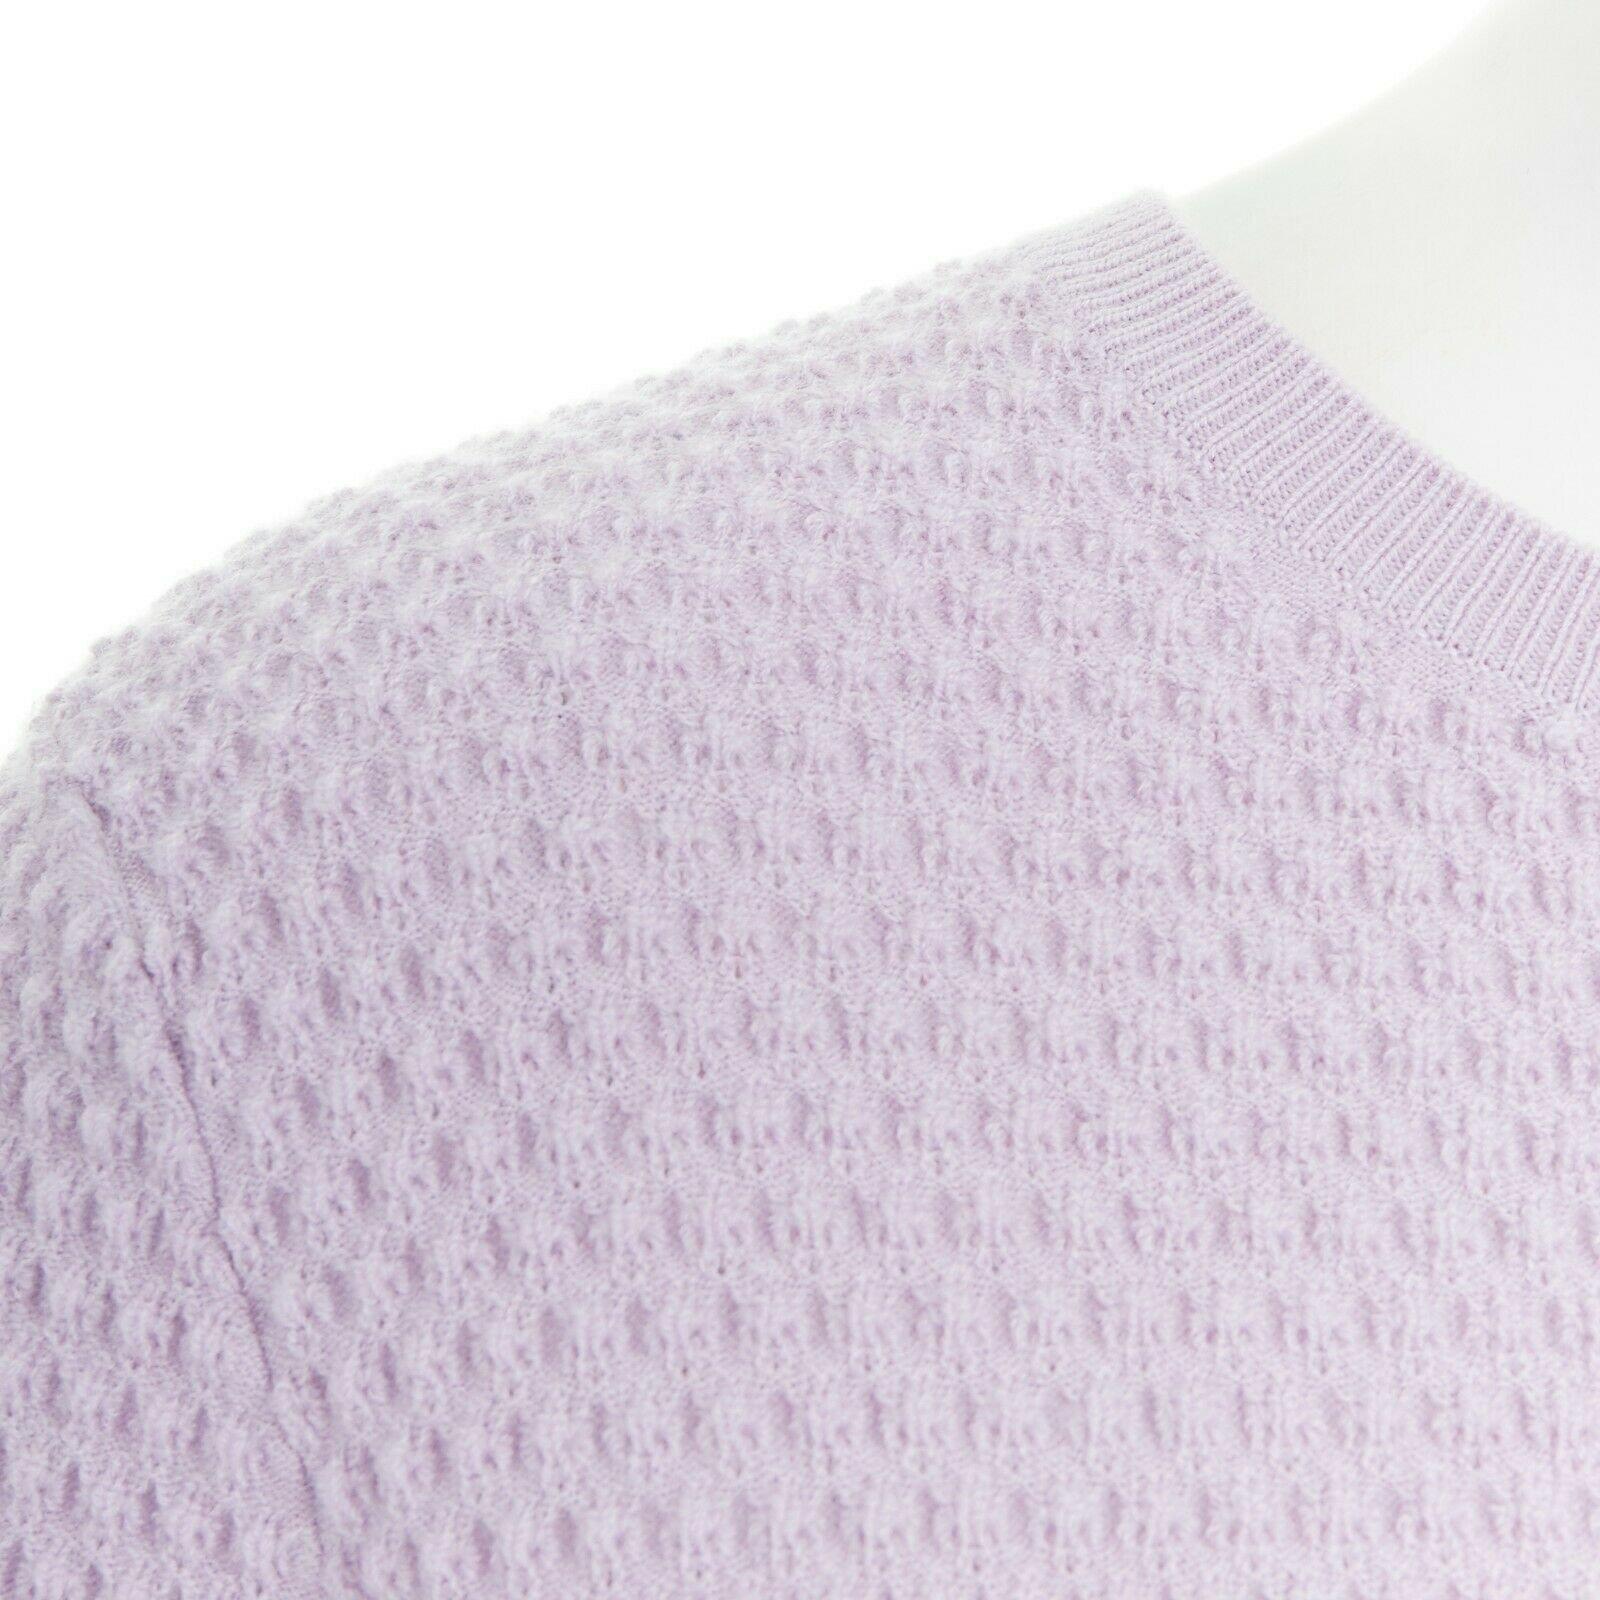 CARVEN wool blend pastel lilac purple textured knit long sleeve sweater top M 
Reference: LACG/A00229 
Brand: Carven 
Material: Wool 
Color: Purple 
Pattern: Solid 
Extra Detail: Wool, polyamide, elastane. Lilac pastel purple. Round neck. Textured